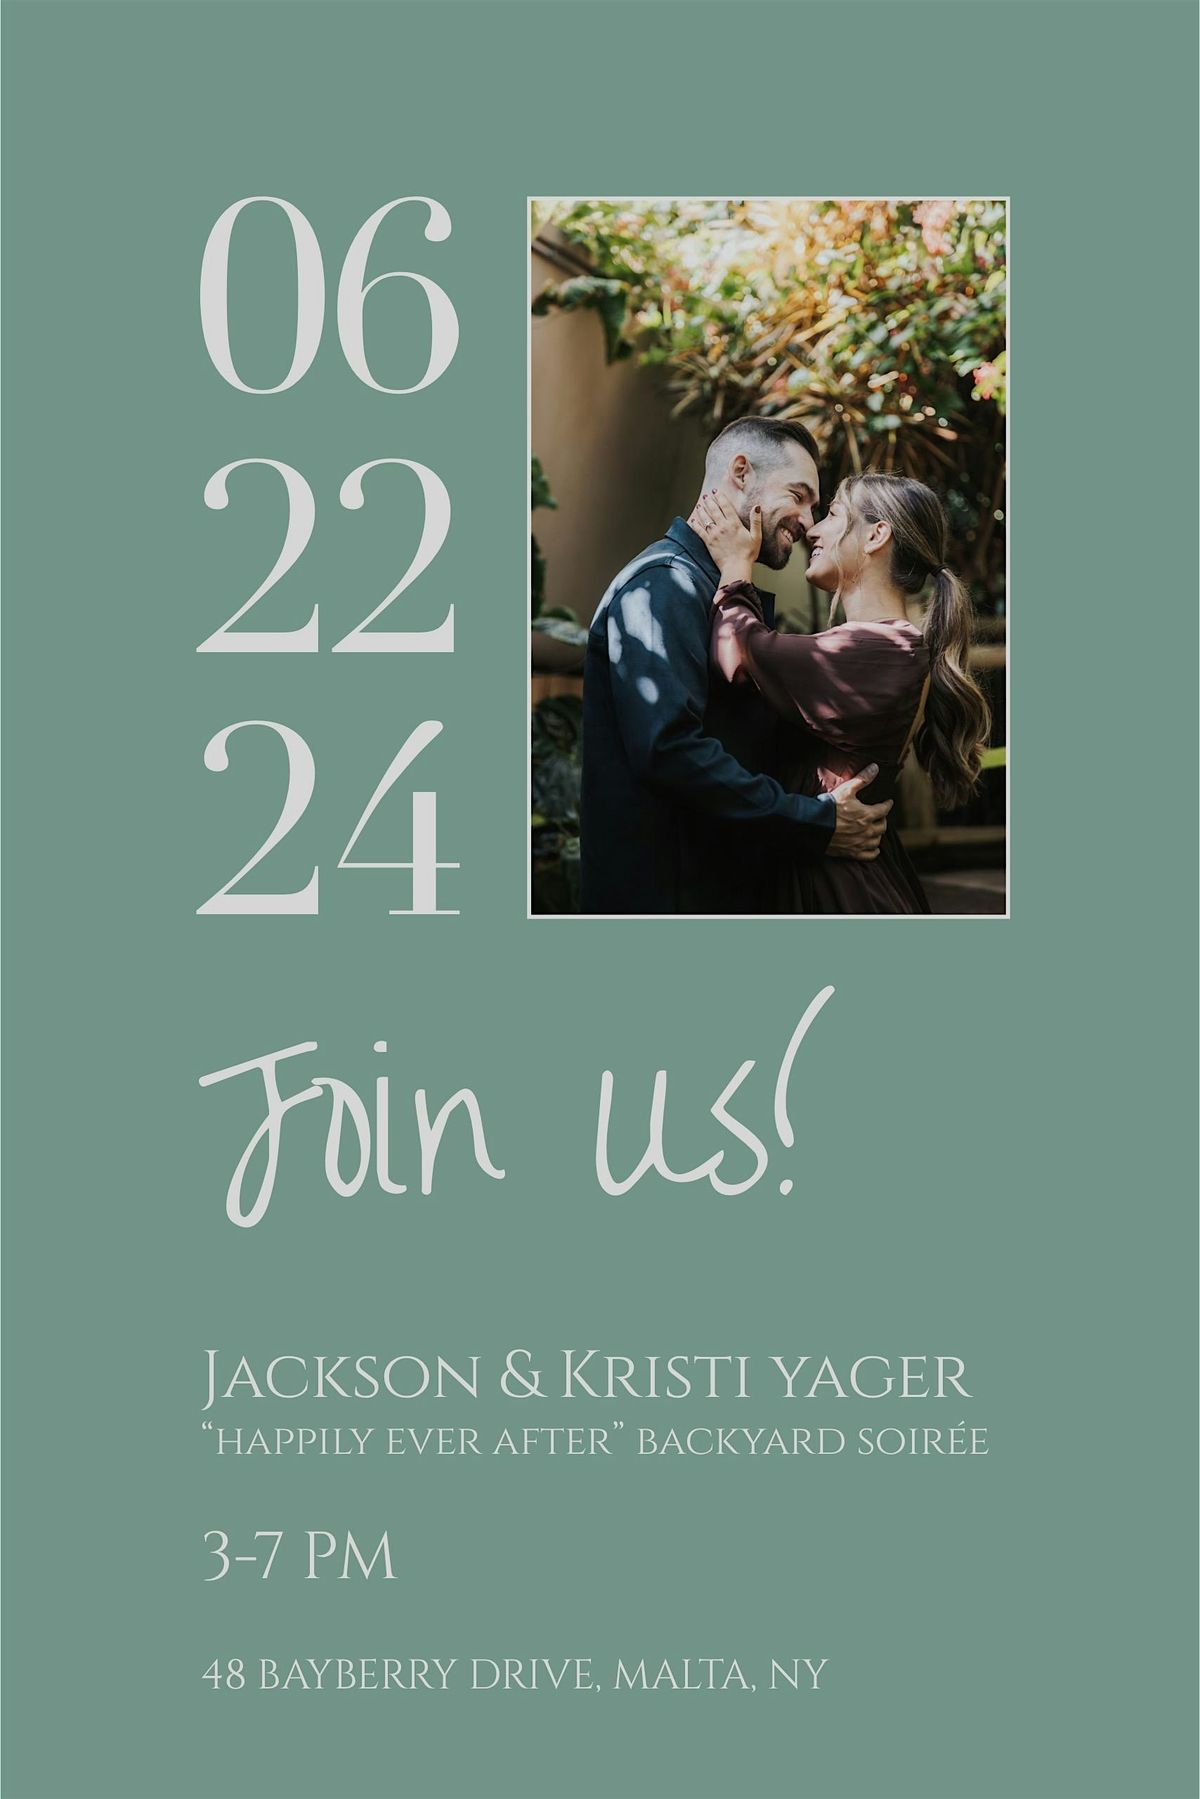 JT & Kristi's "Happily Ever After" Party